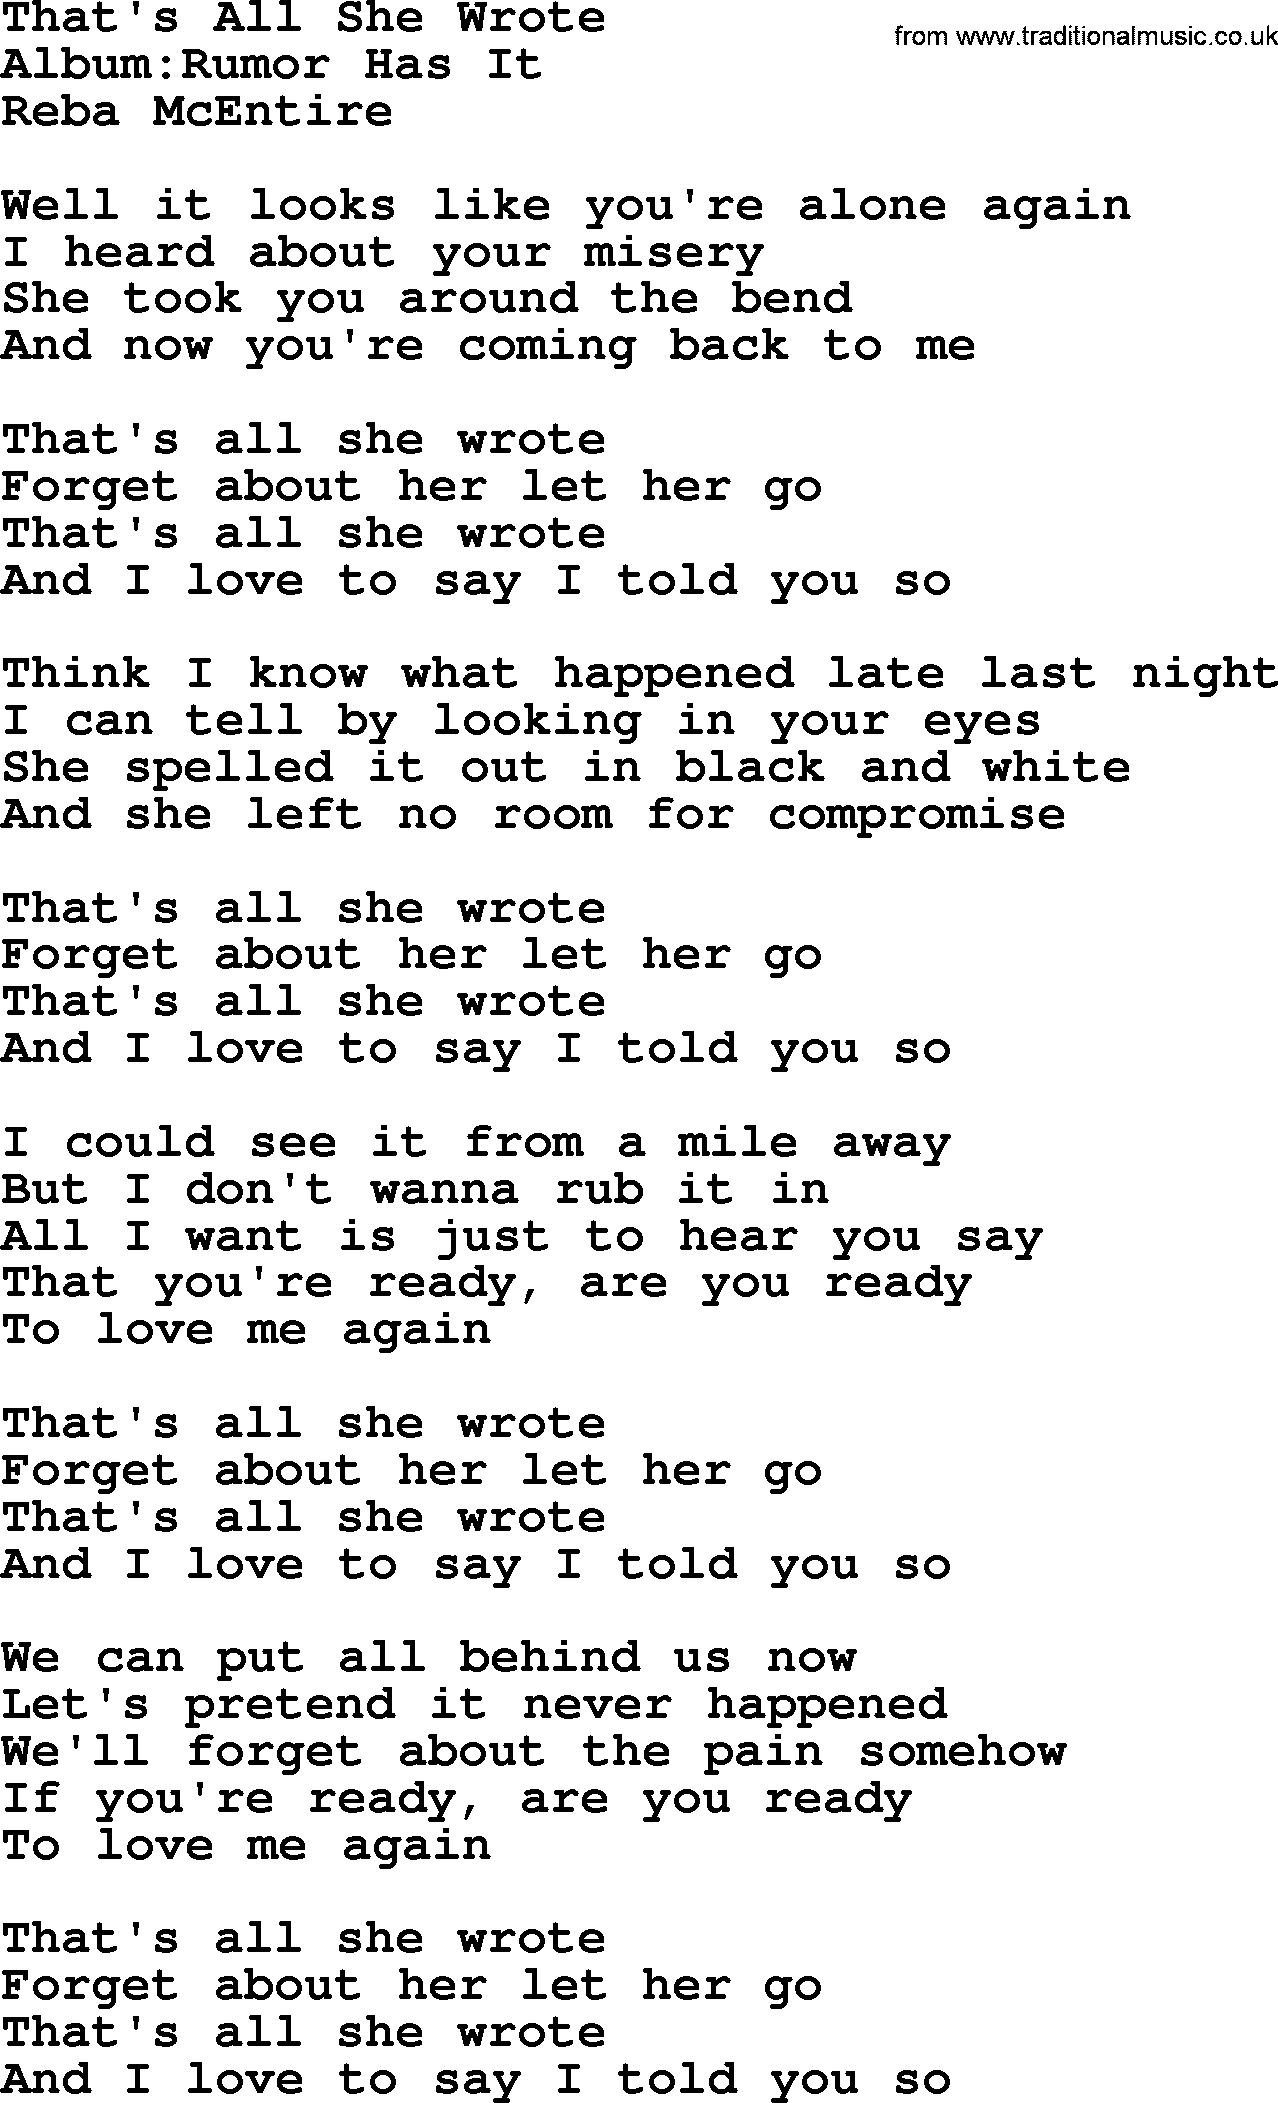 Reba McEntire song: That's All She Wrote lyrics